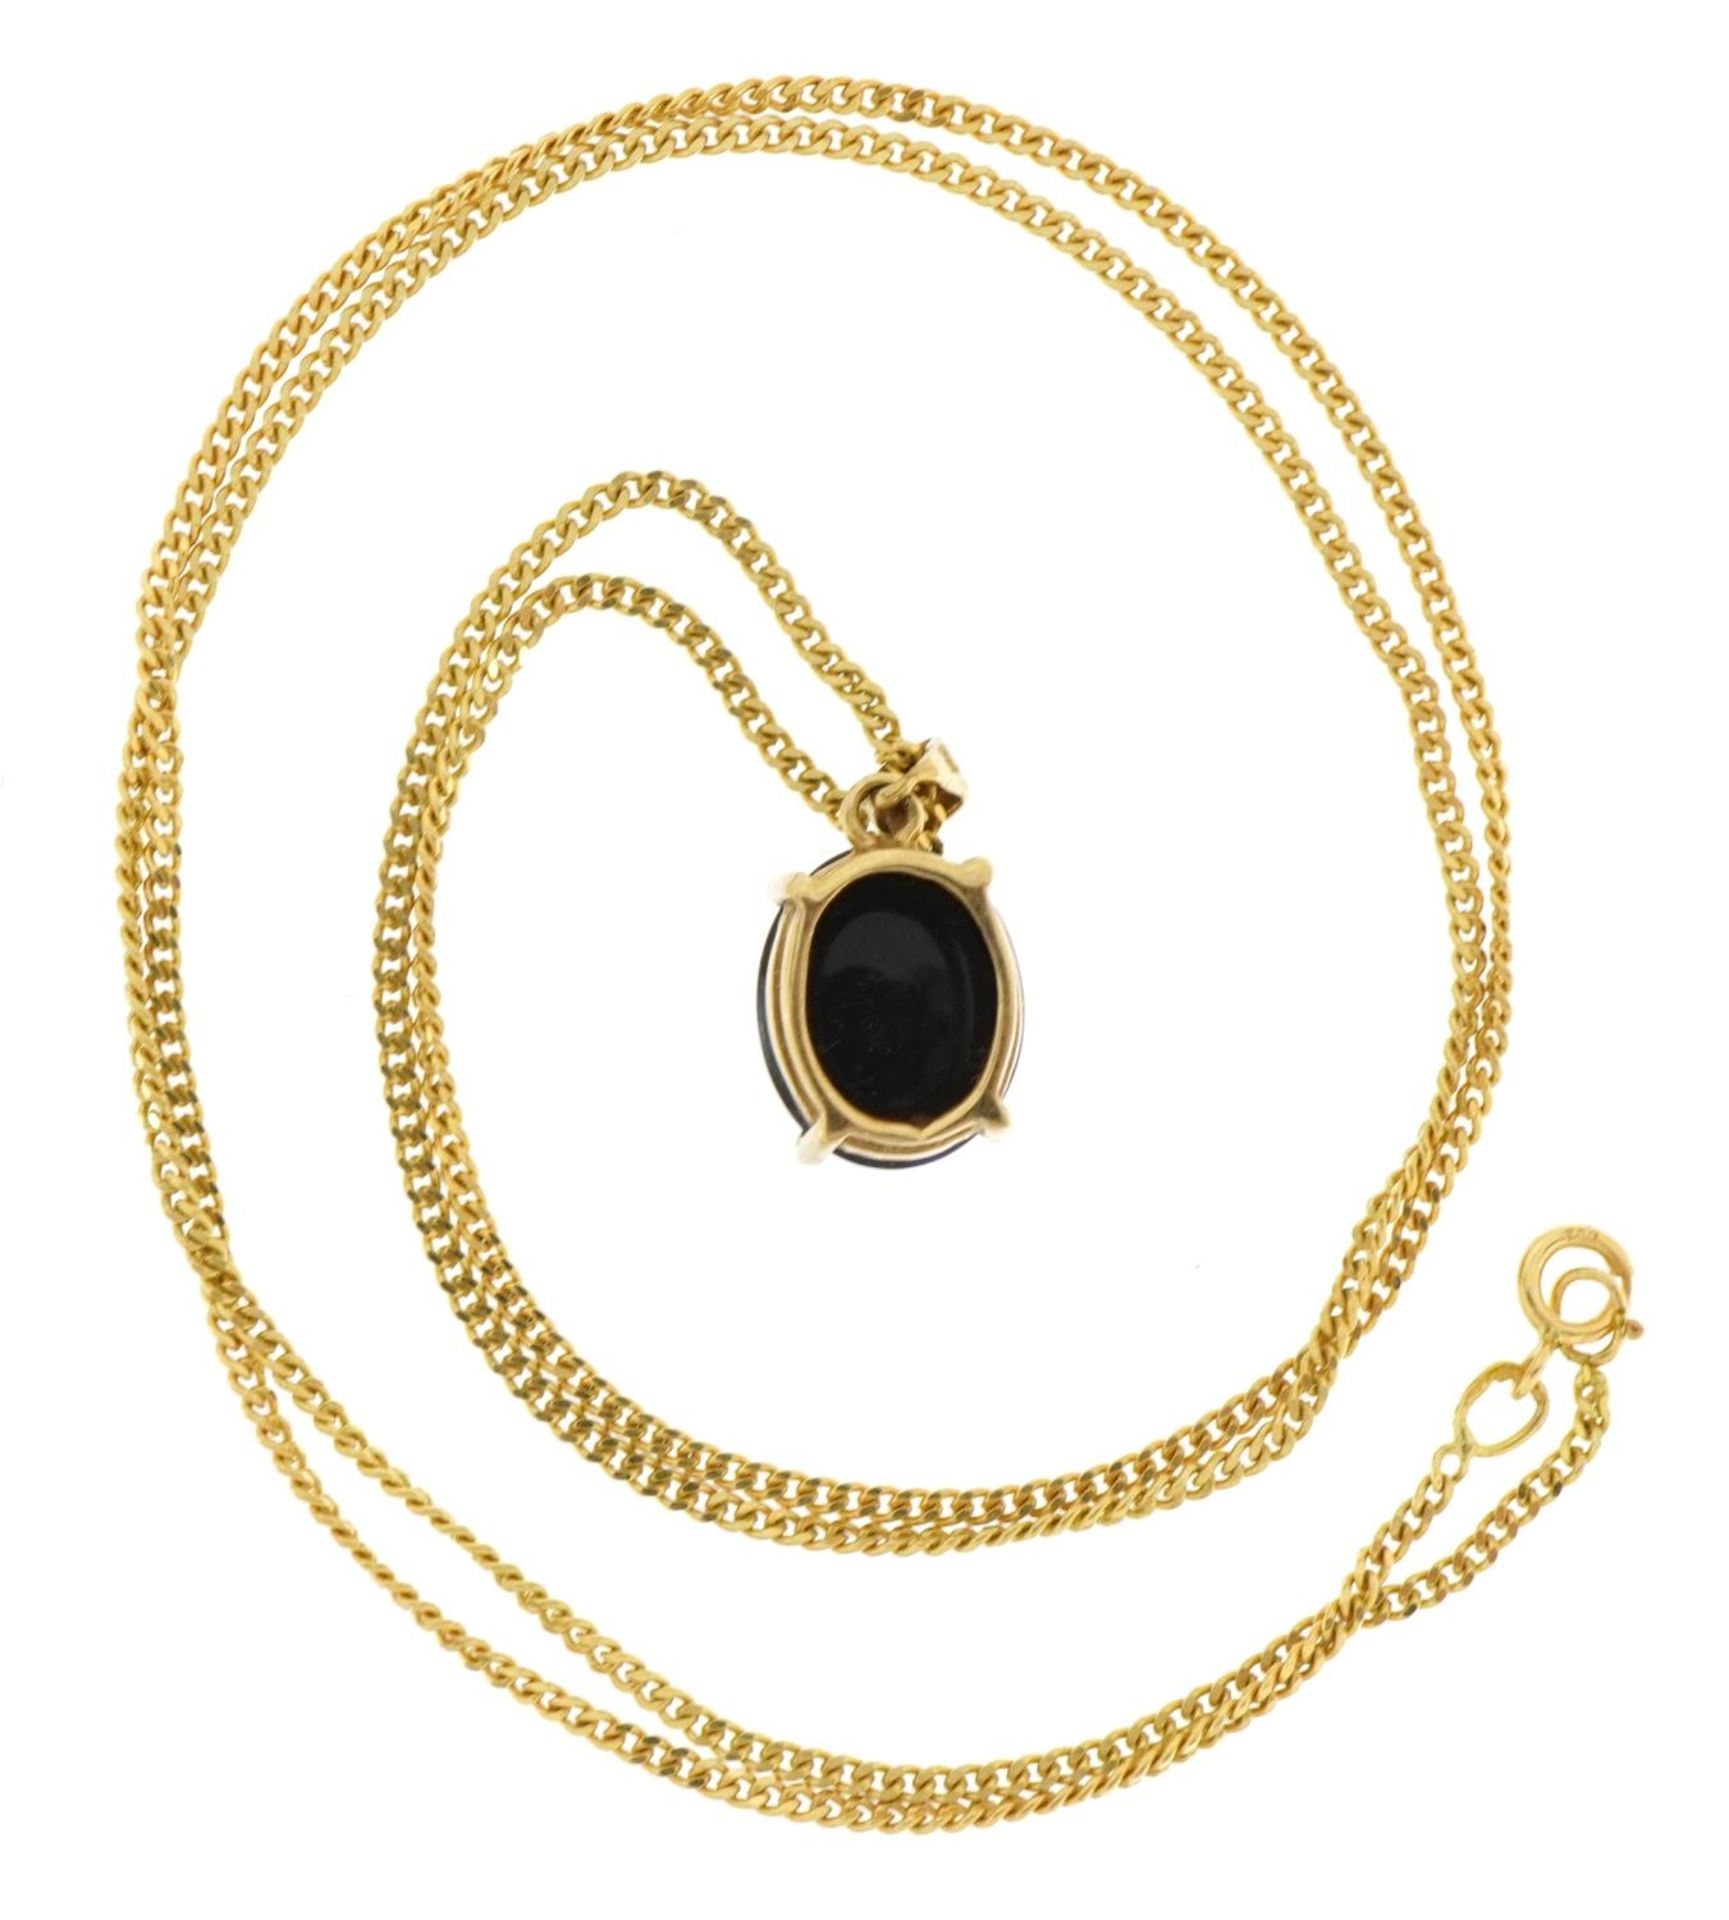 9ct gold blue stone pendant on an 18ct gold curb link necklace, 1.8cm high and 50.5cm in length, - Image 3 of 4